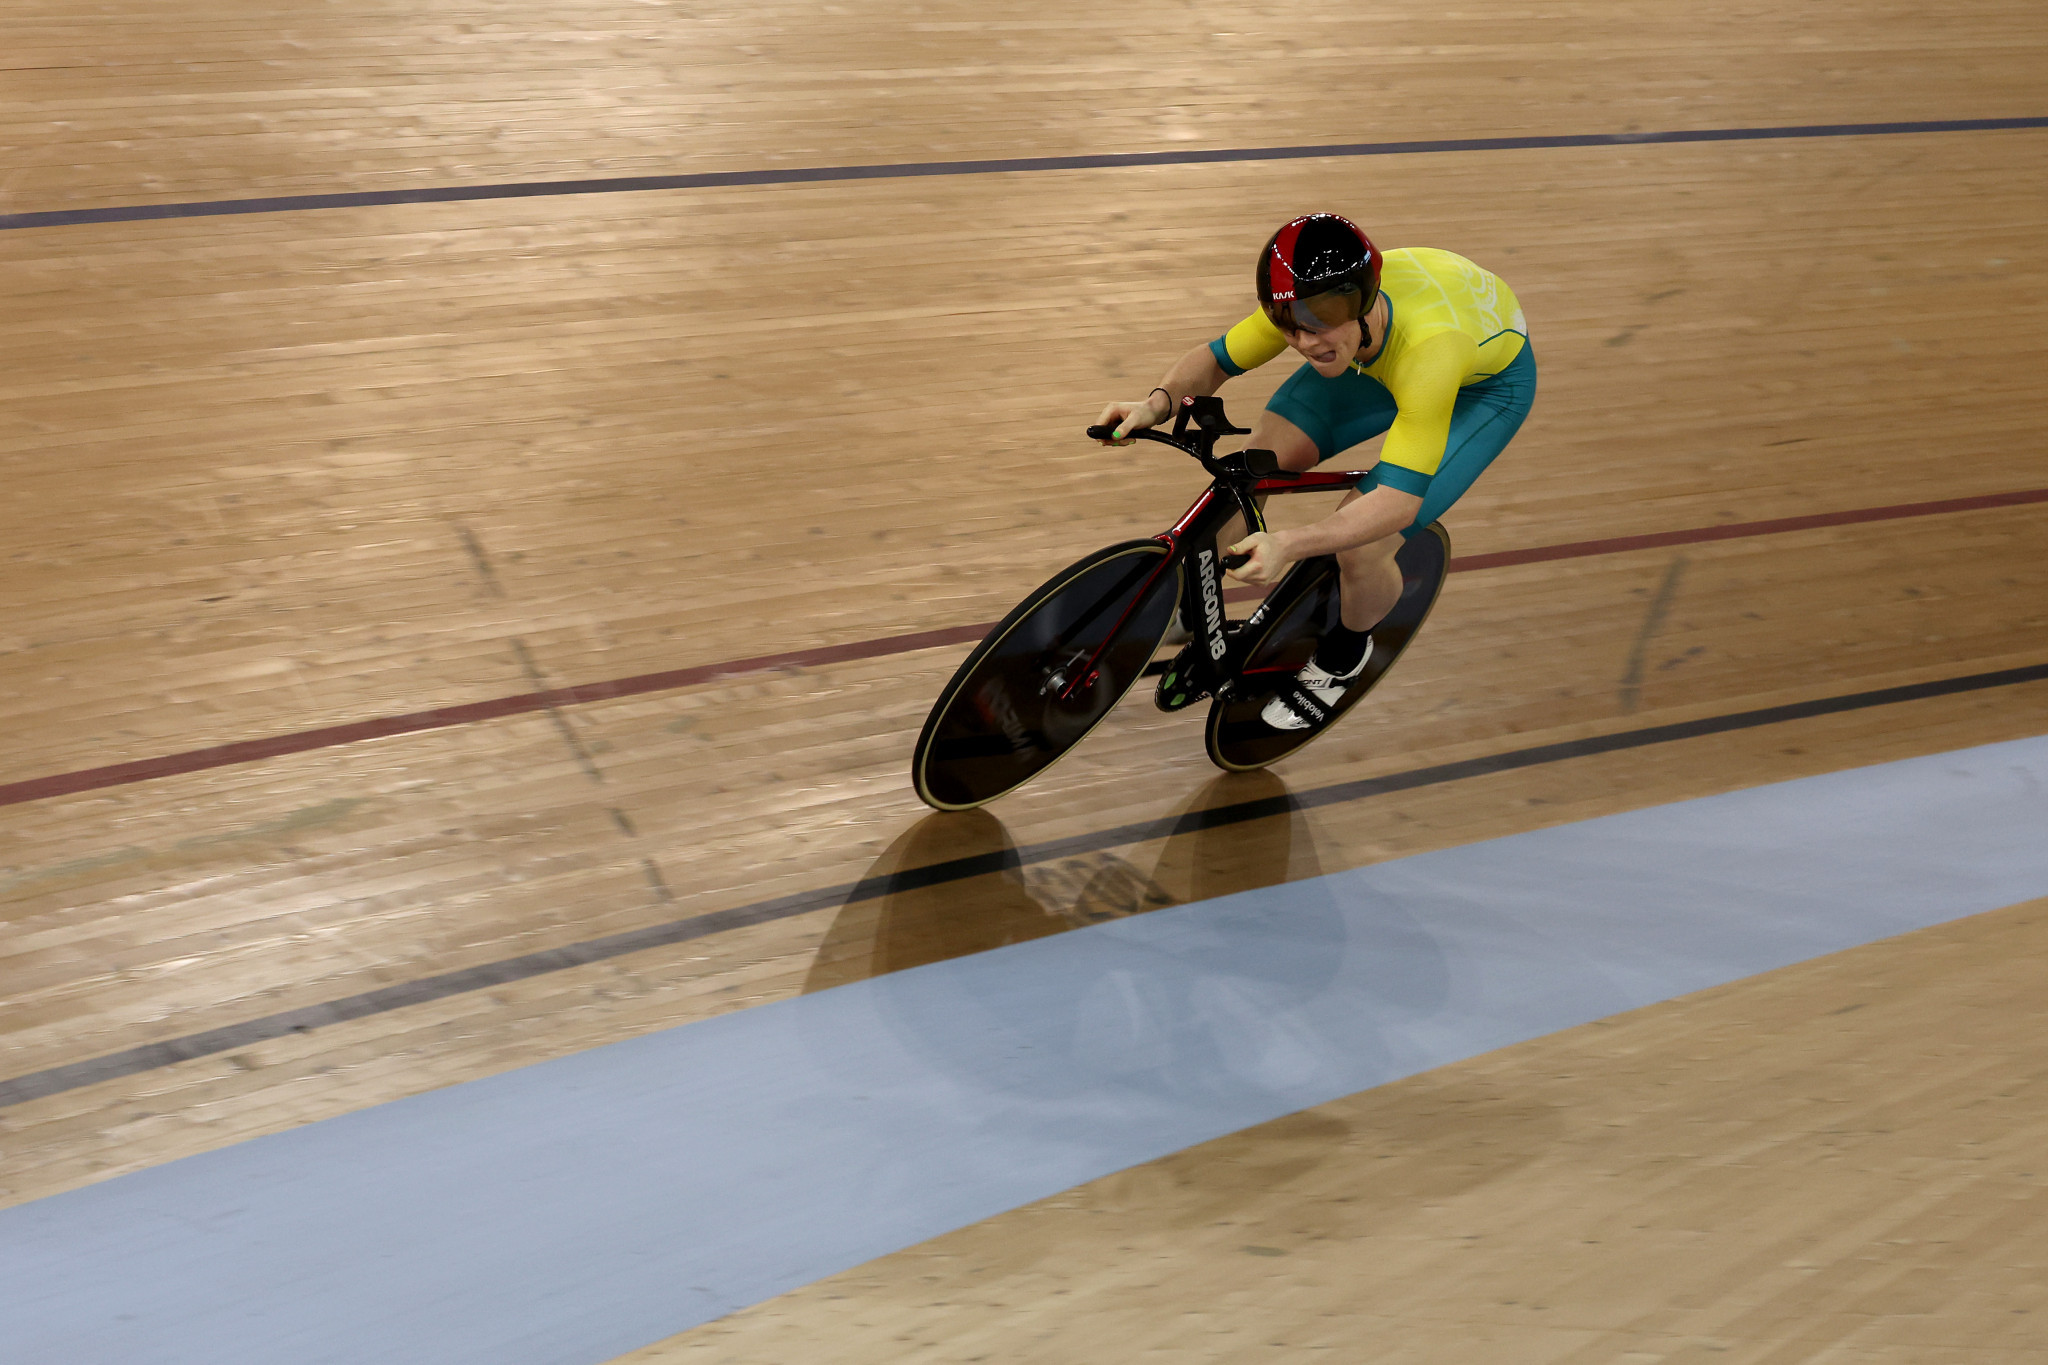 Australia's Tayte Ryan won the men's 1,000m time trial and keirin finals on the last day of Trinbago 2023 ©Getty Images